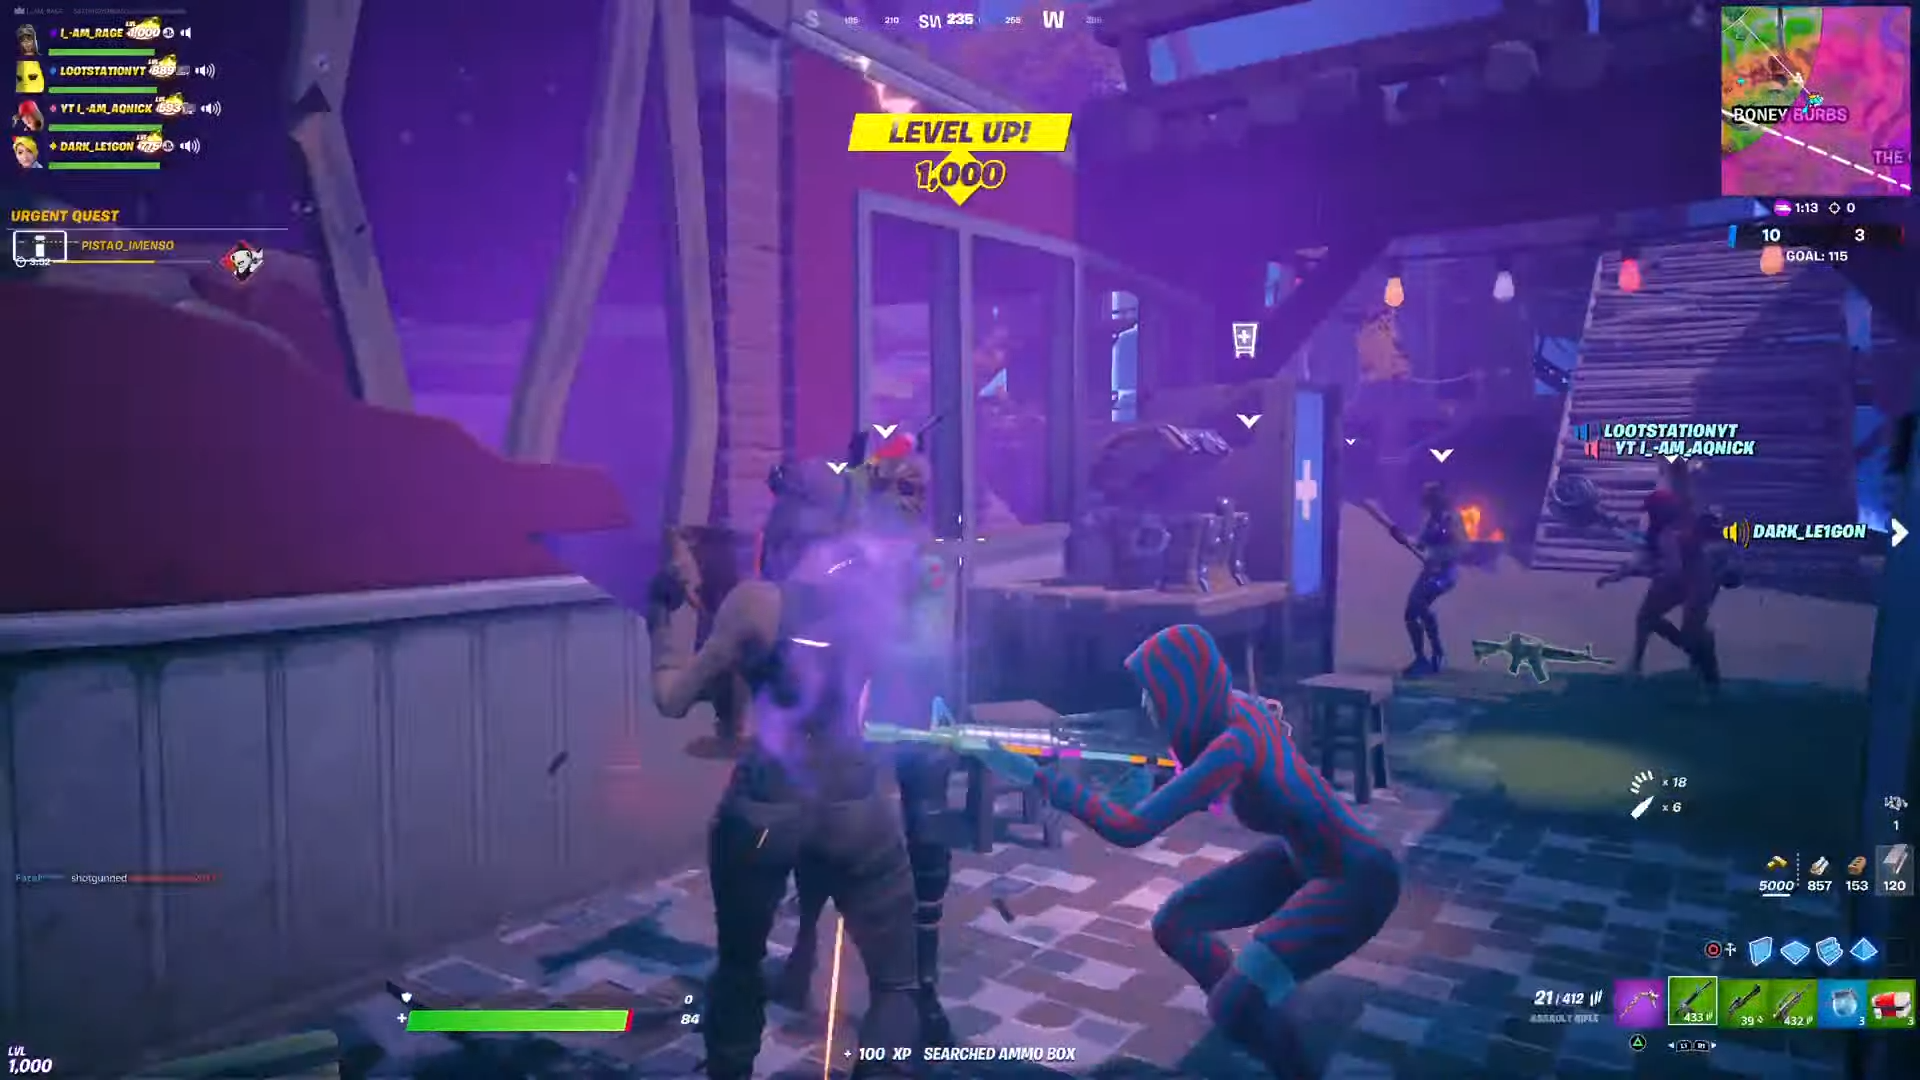 Fortnite YouTuber becomes the first to reach Level 1000 in the Game's History